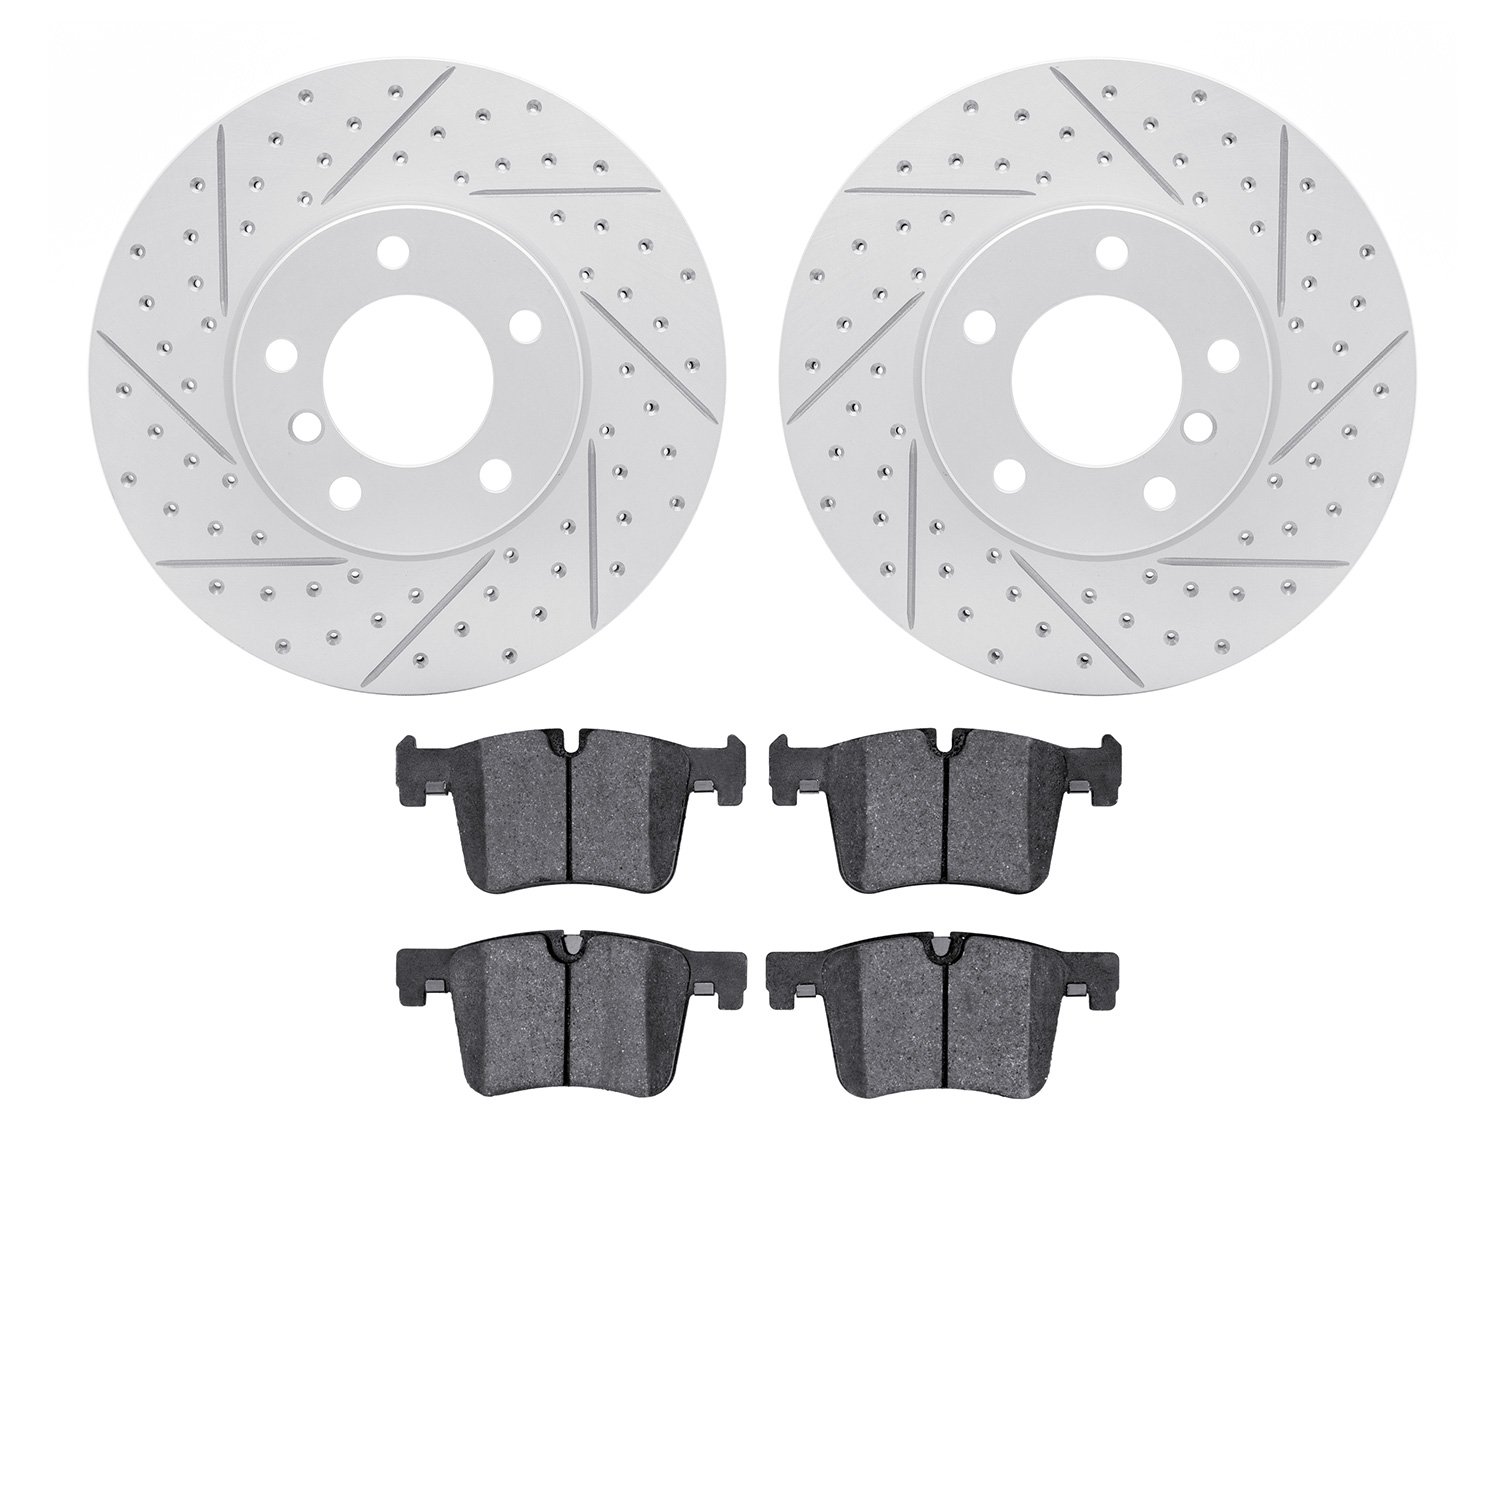 2502-31068 Geoperformance Drilled/Slotted Rotors w/5000 Advanced Brake Pads Kit, 2013-2013 BMW, Position: Front